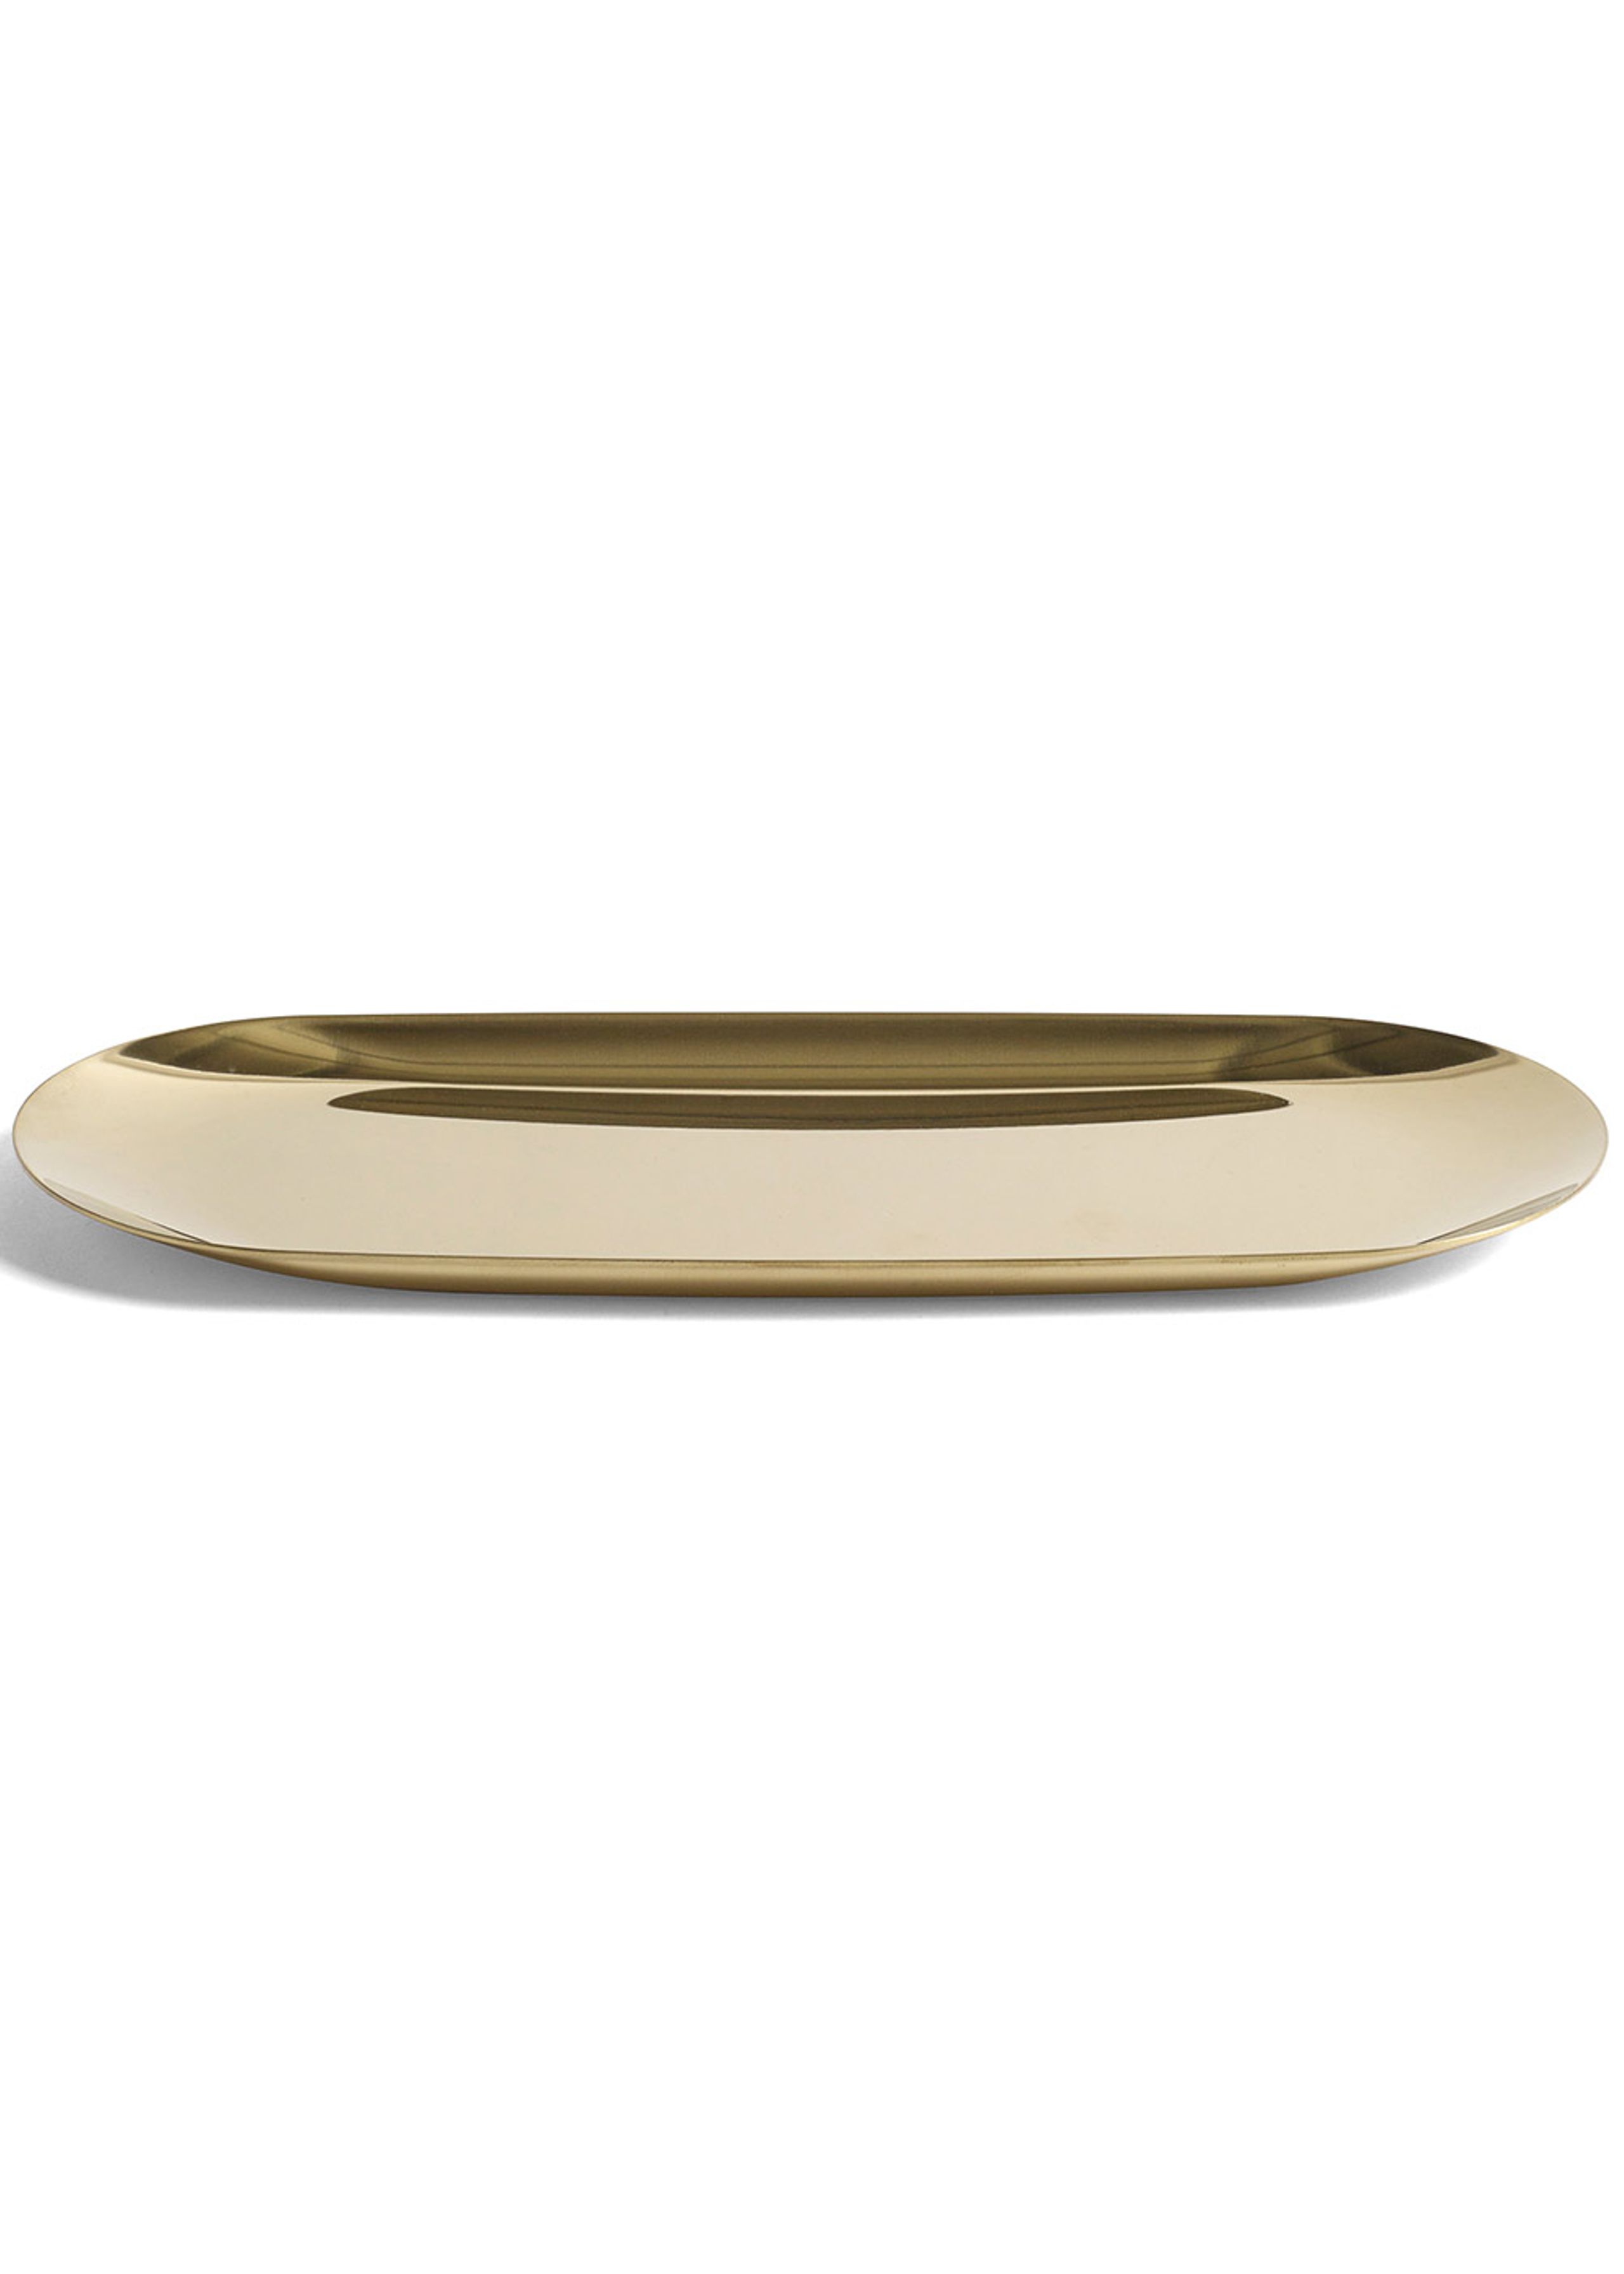 HAY Large Gold Tray